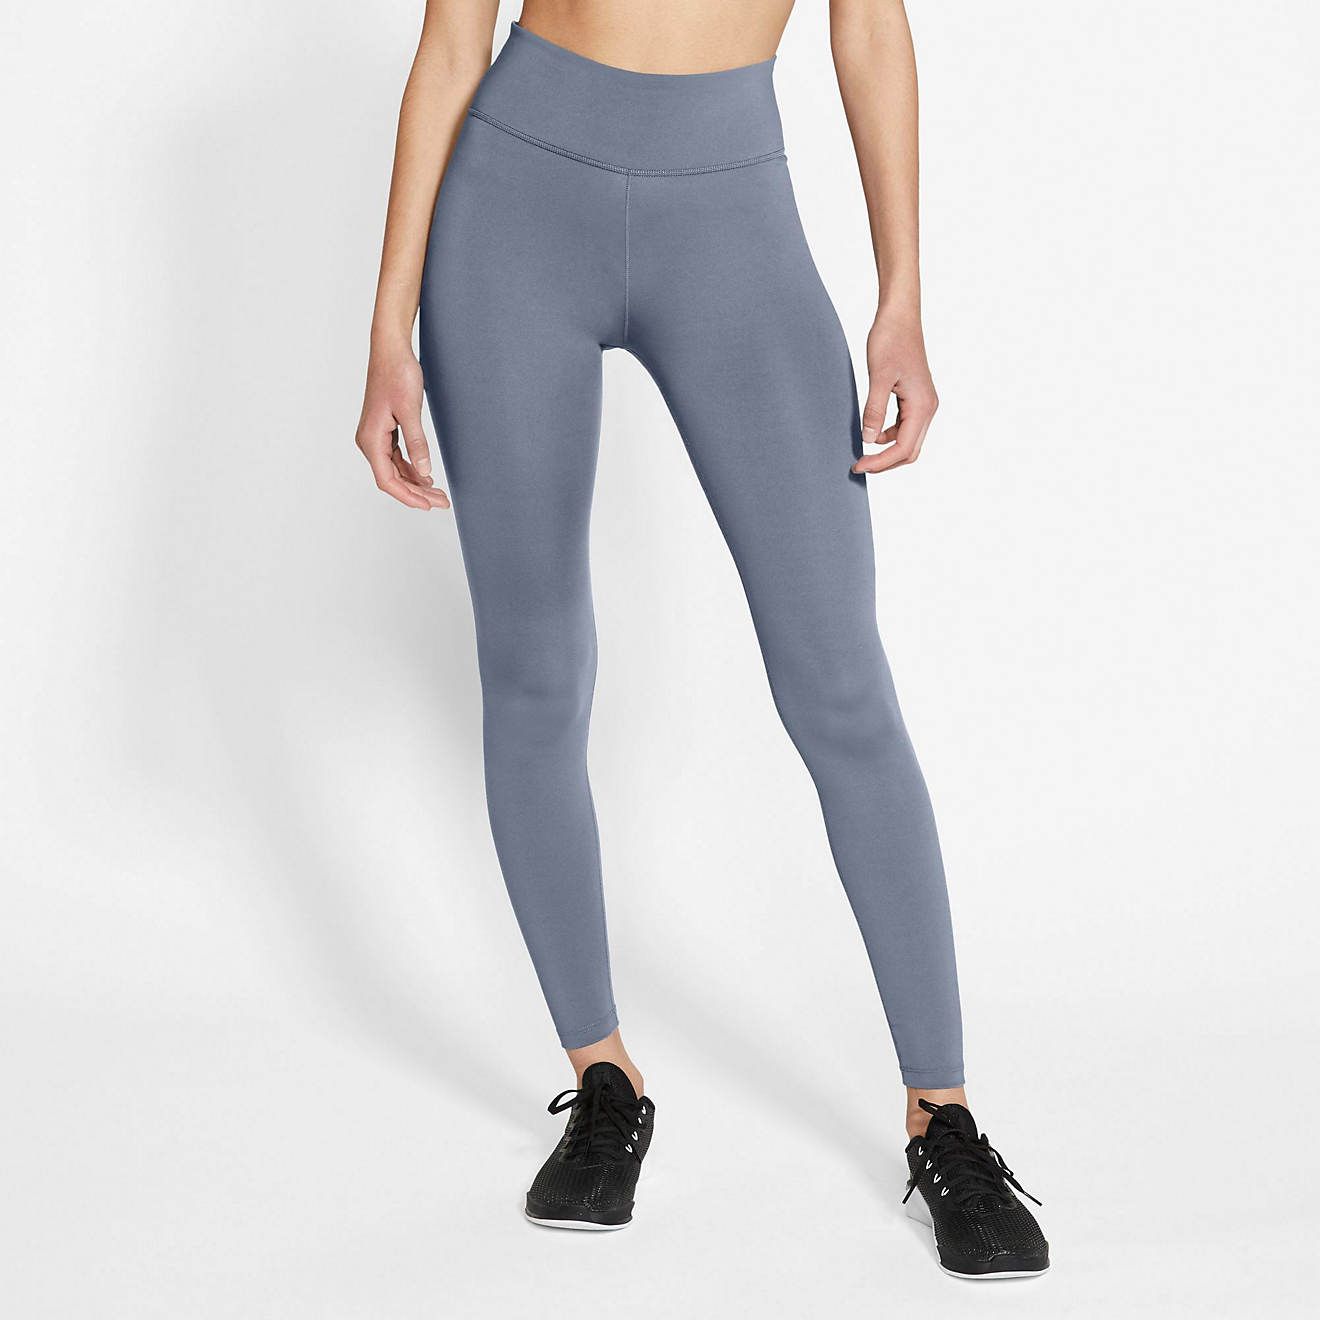 Nike Women's One Mid Rise 2.0 Tights | Academy Sports + Outdoor Affiliate